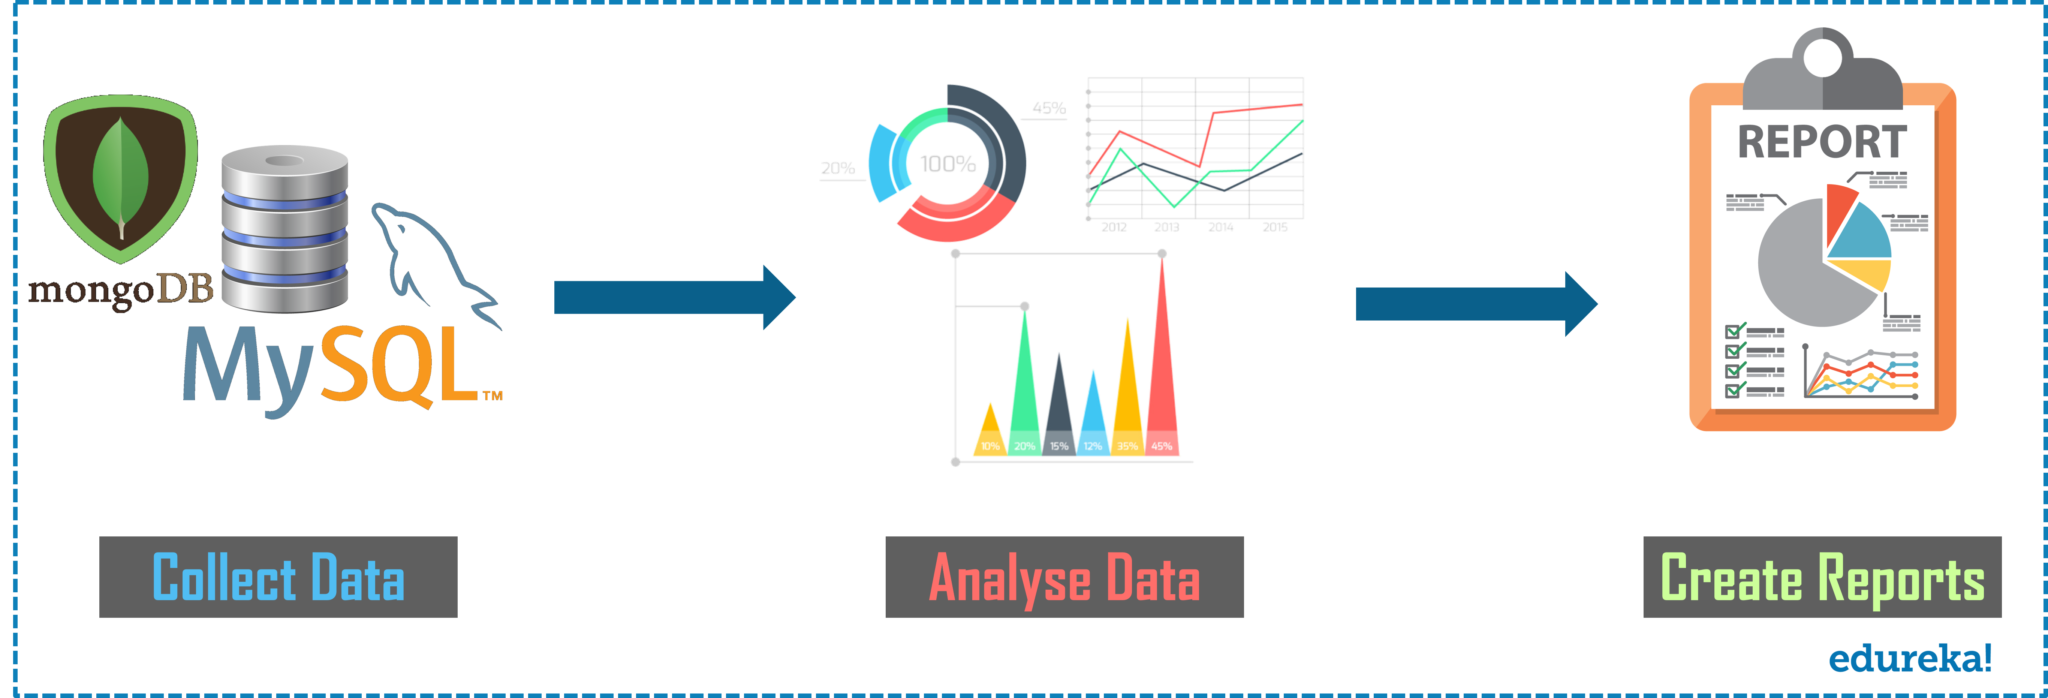 How To Become A Data Analyst - What is Data Analytics - Edureka